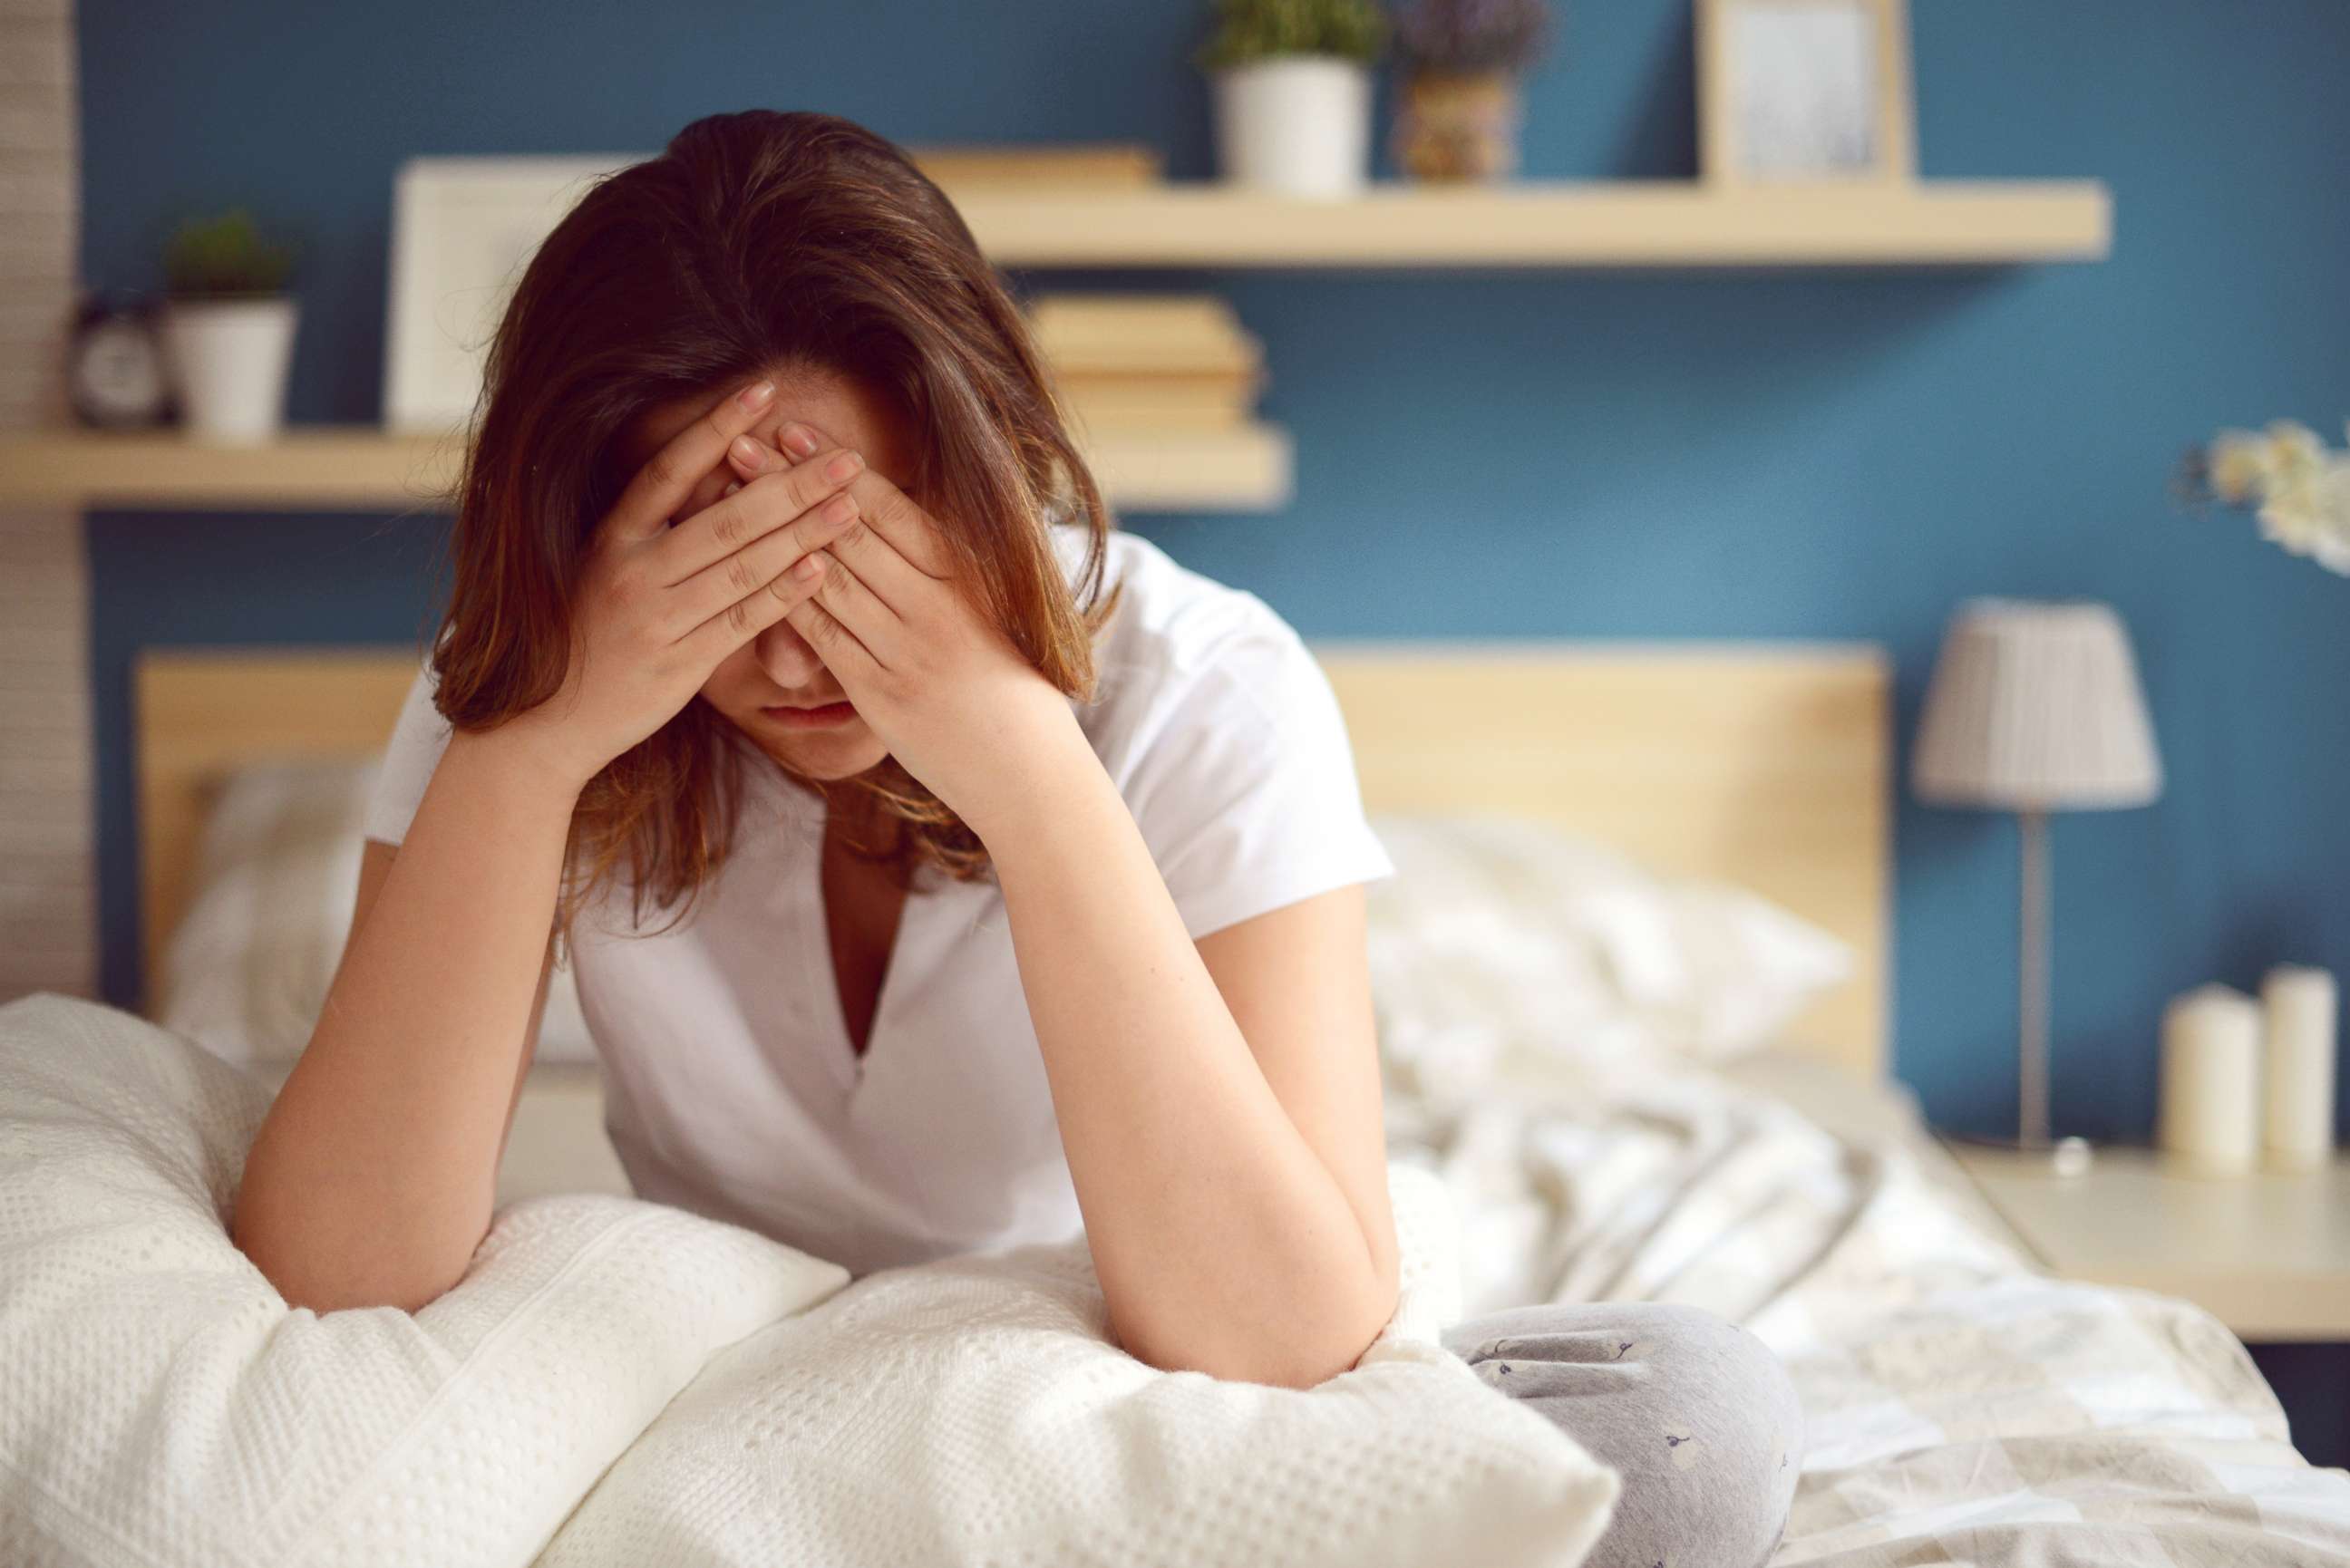 PHOTO: A woman is pictured with insomnia in this undated stock photo.